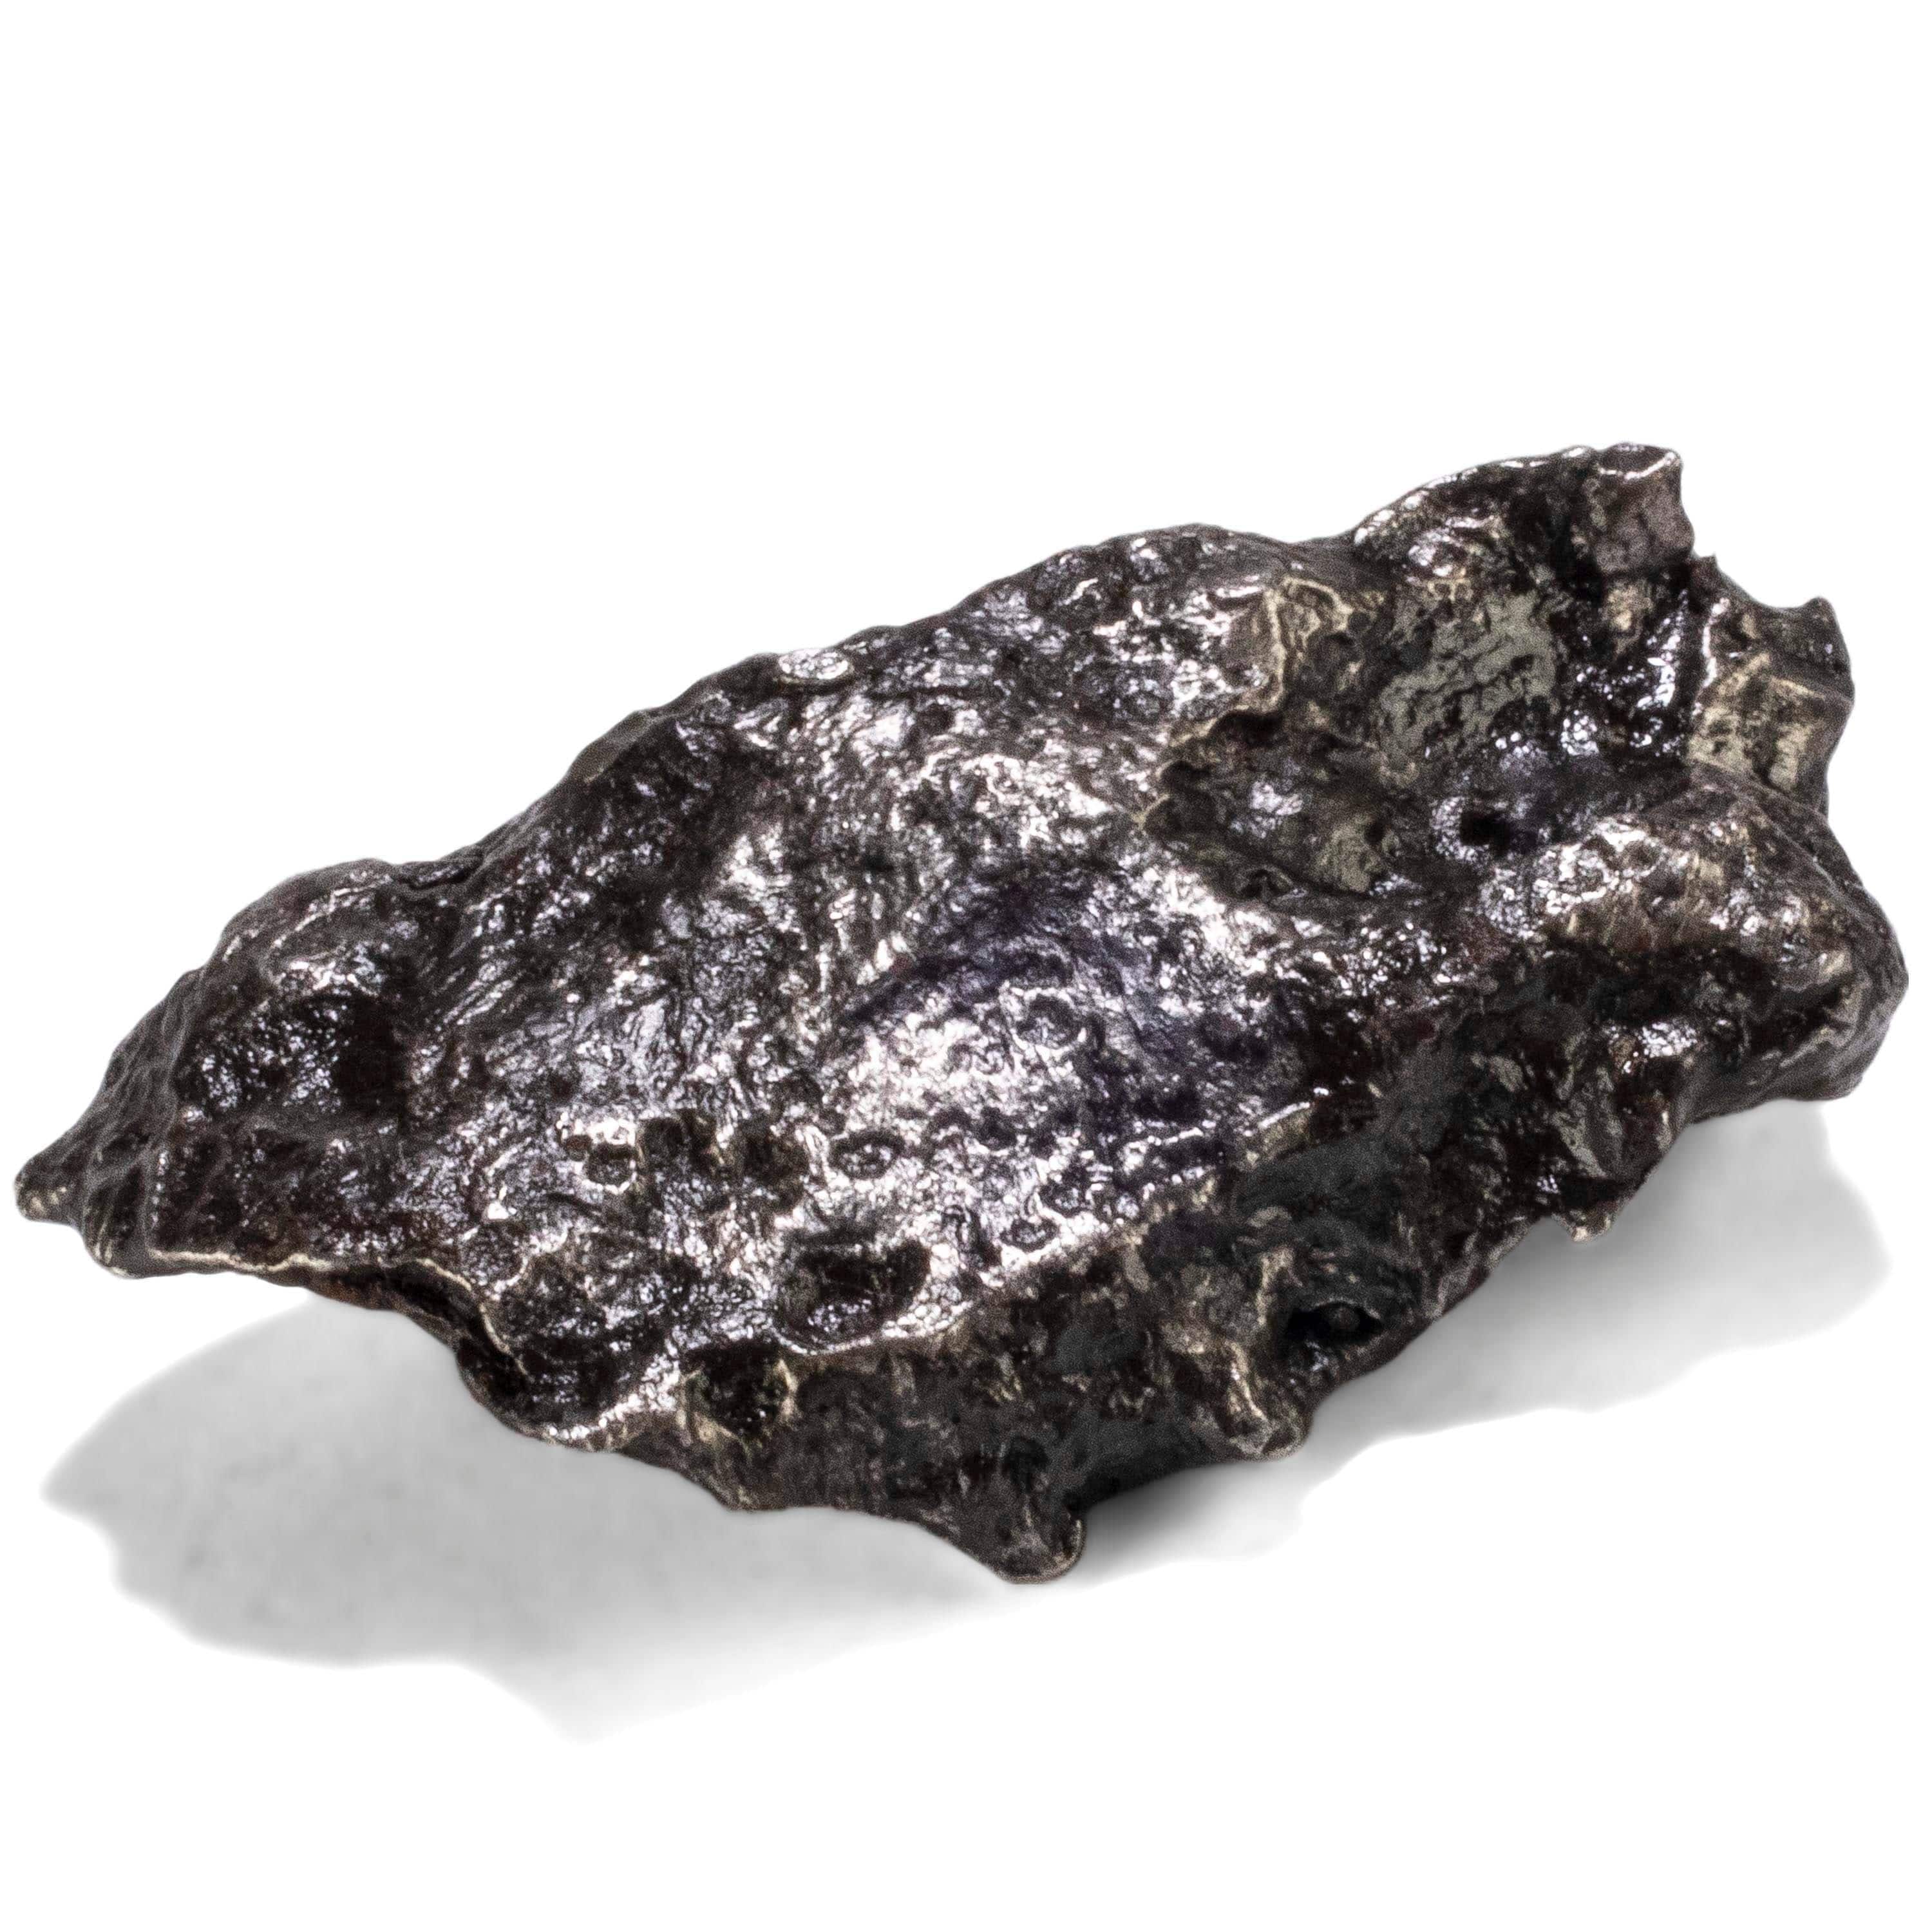 Kalifano Meteorites Sikhote-Alin Iron Meteorite discovered in Russia: 42-50 grams MTS1000